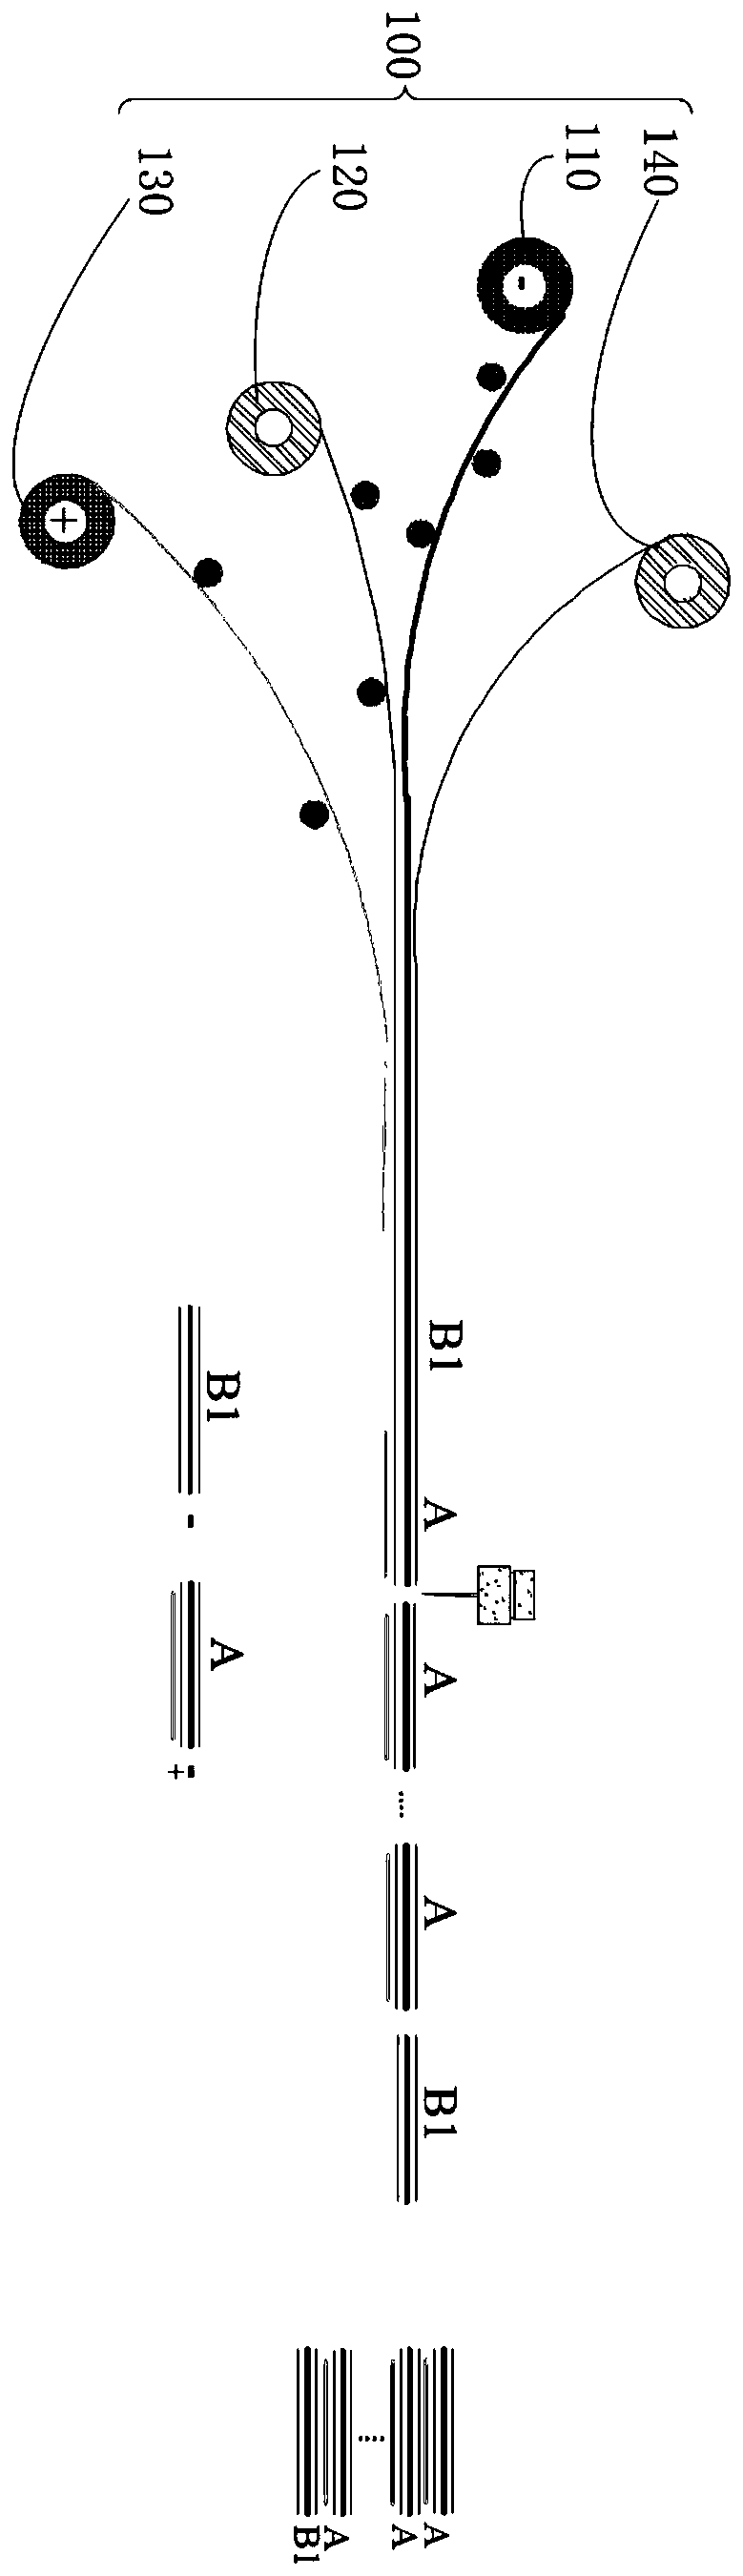 Die cutting lamination system and method